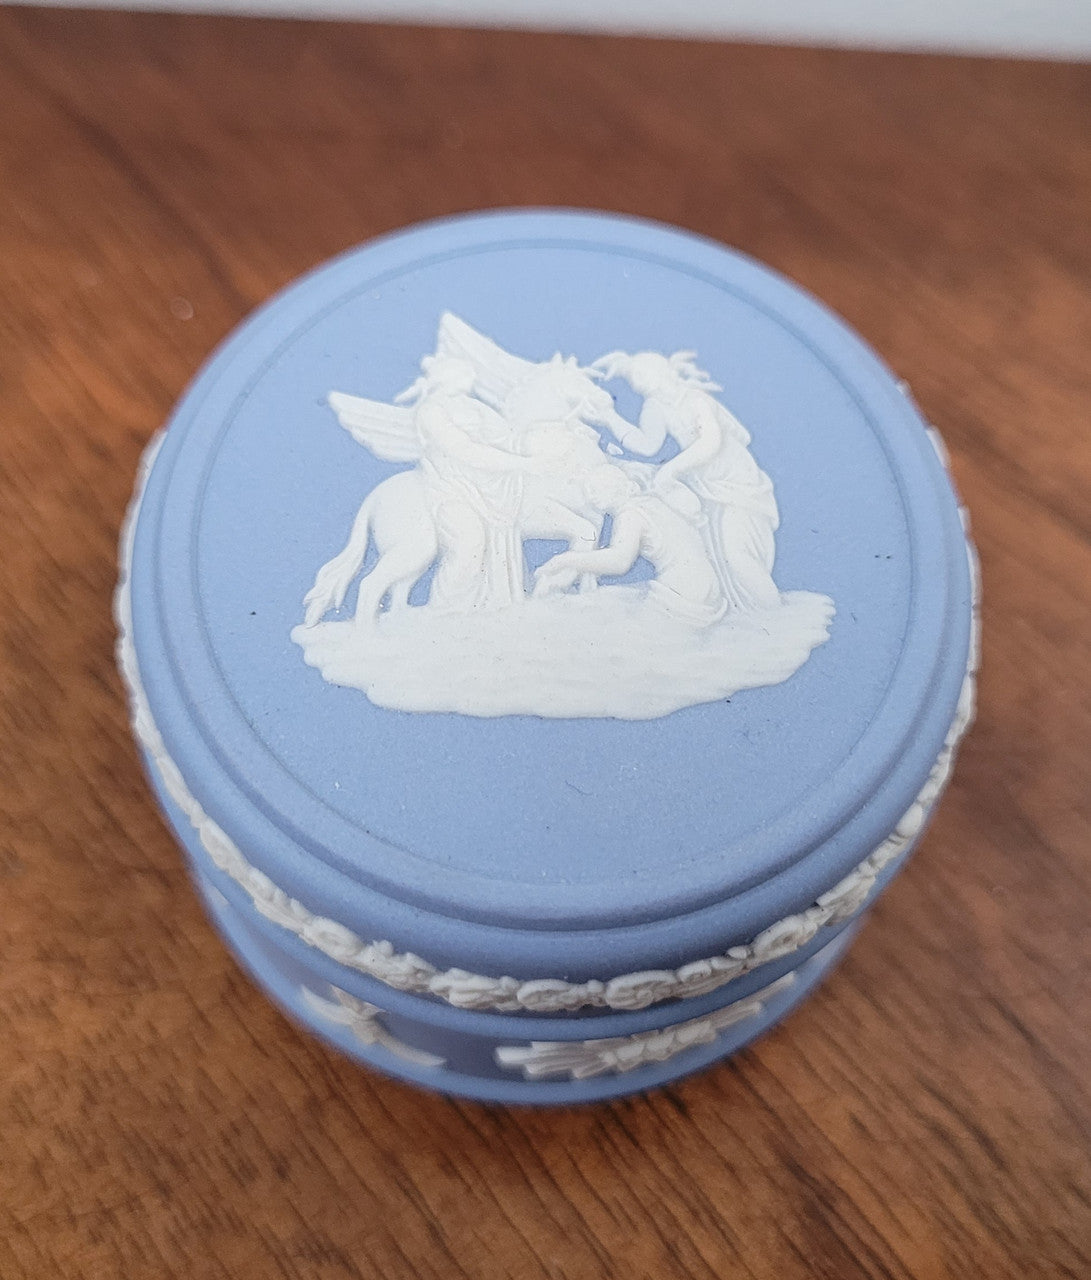 Wedgwood blue jasper trinket box. In good original condition with no chips or cracks.